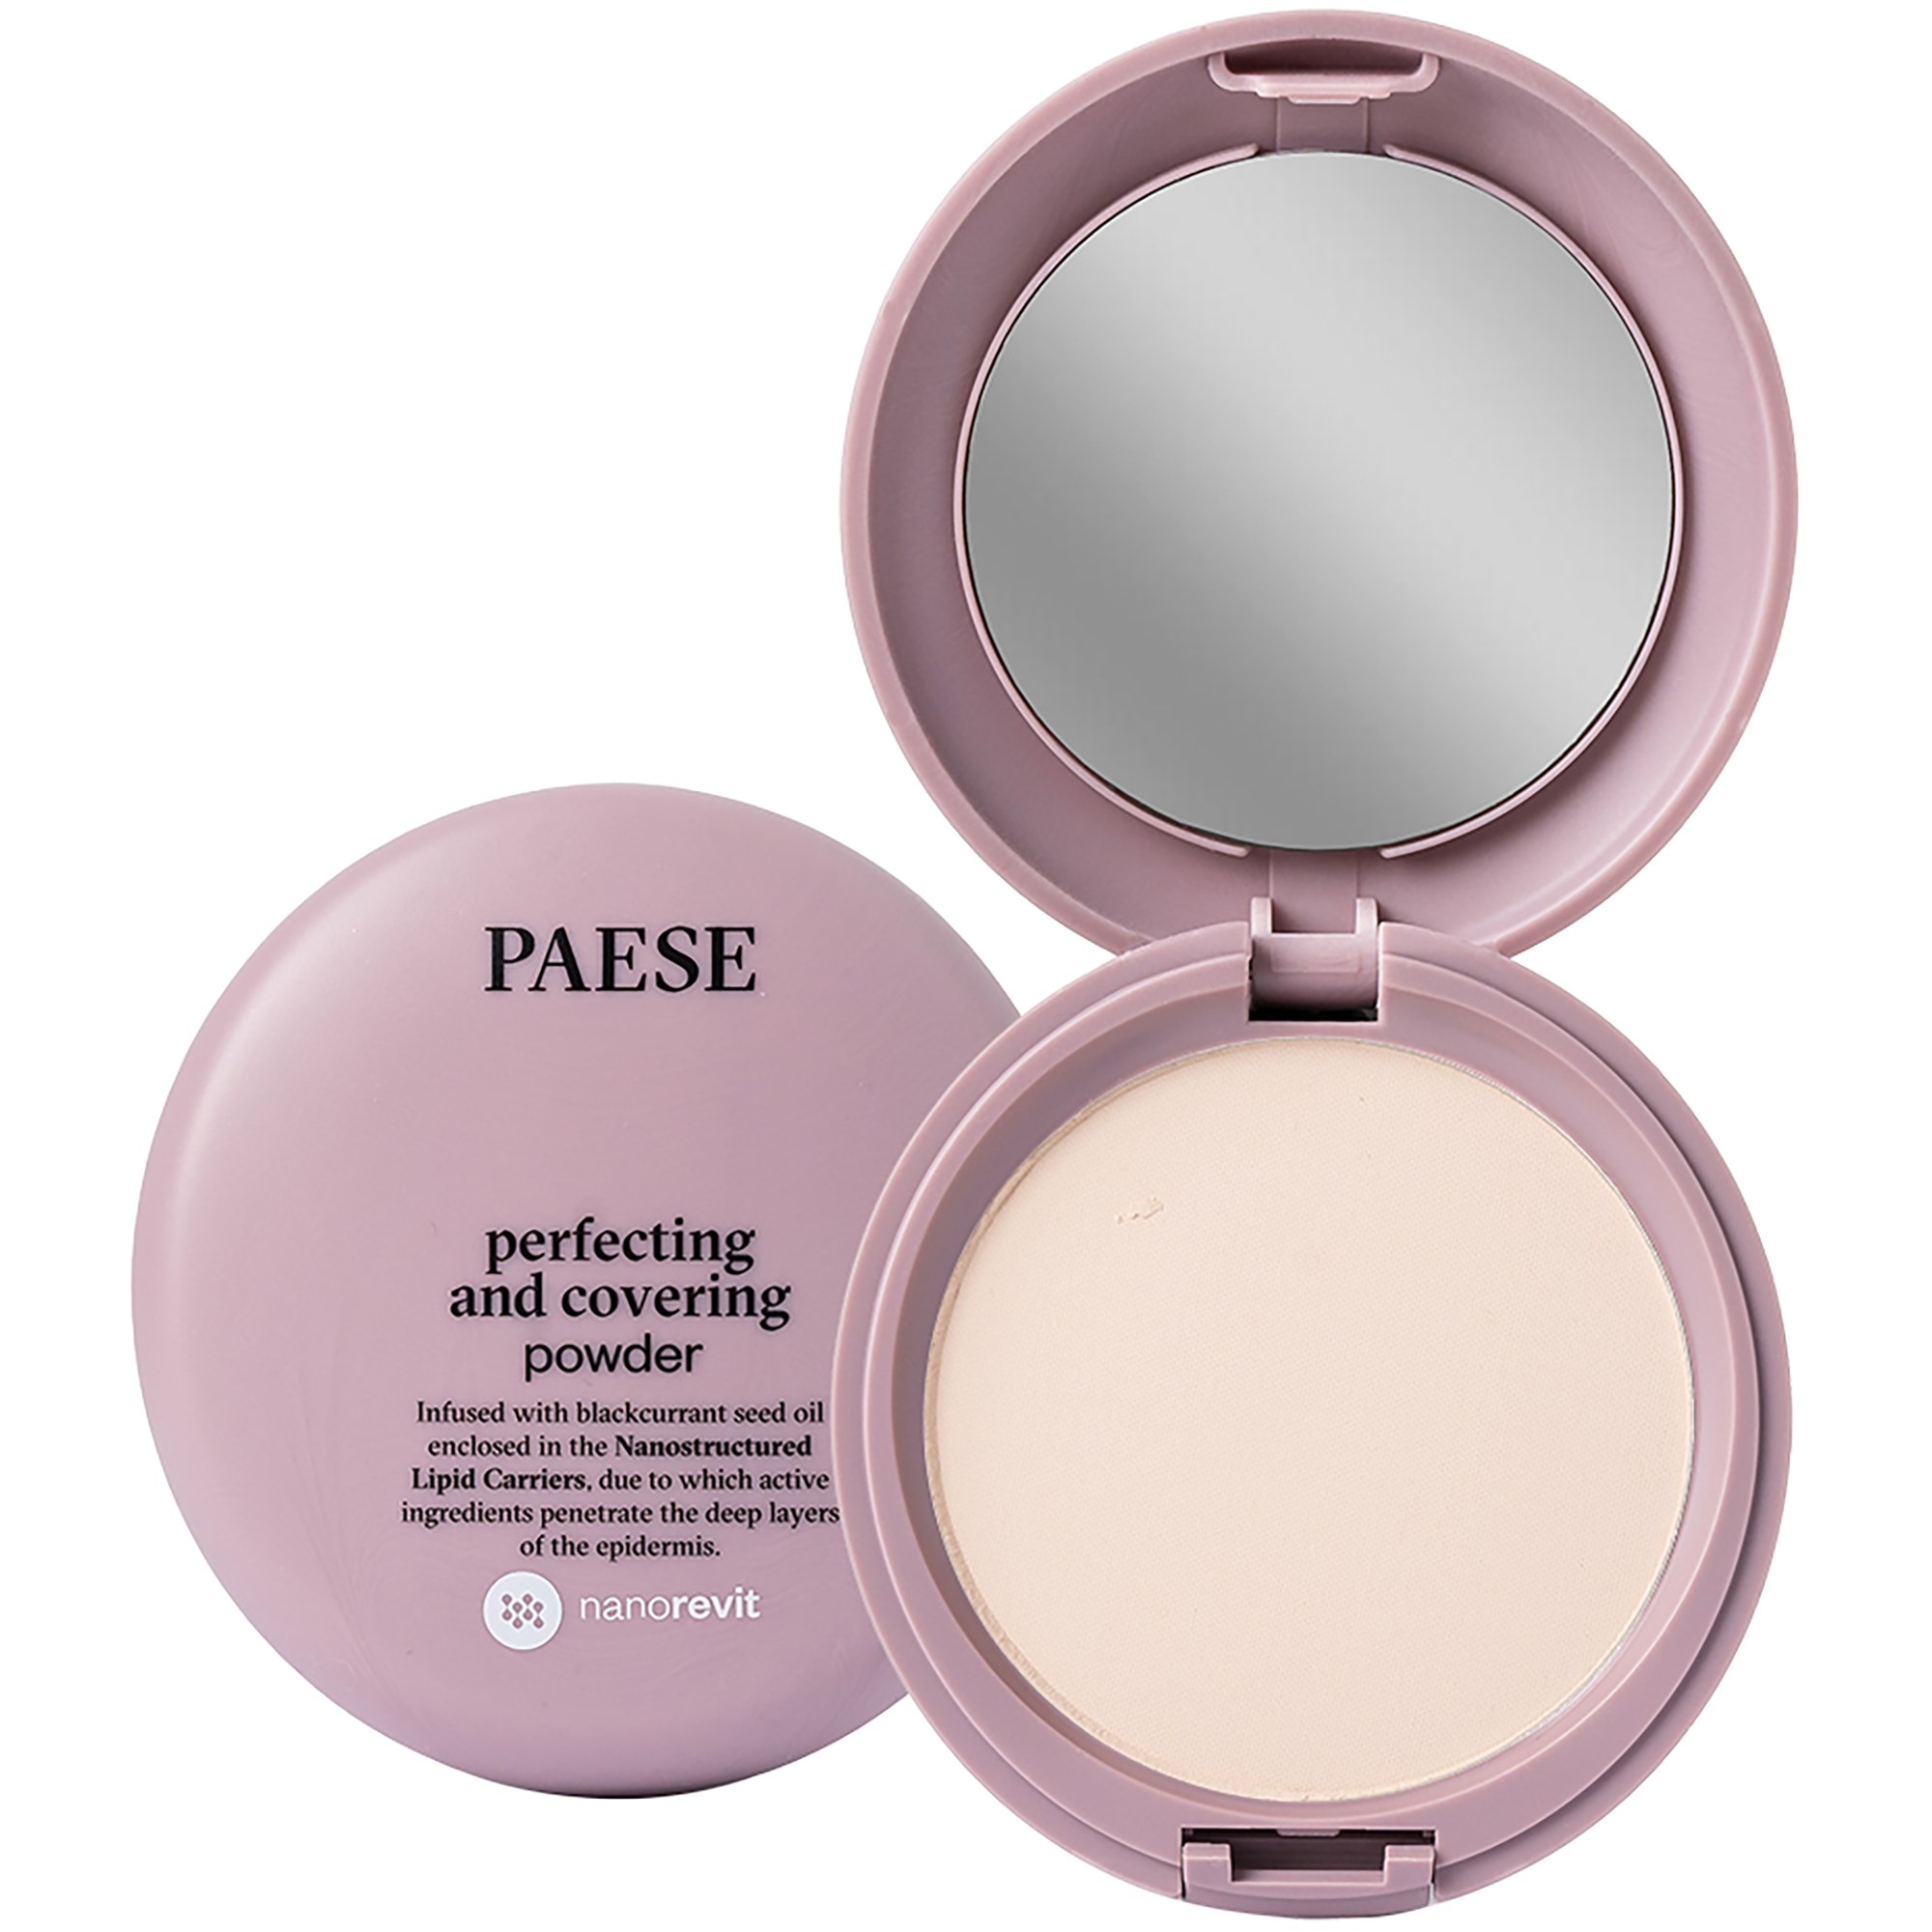 PAESE Perfecting and Covering Powder No 01 Ivory